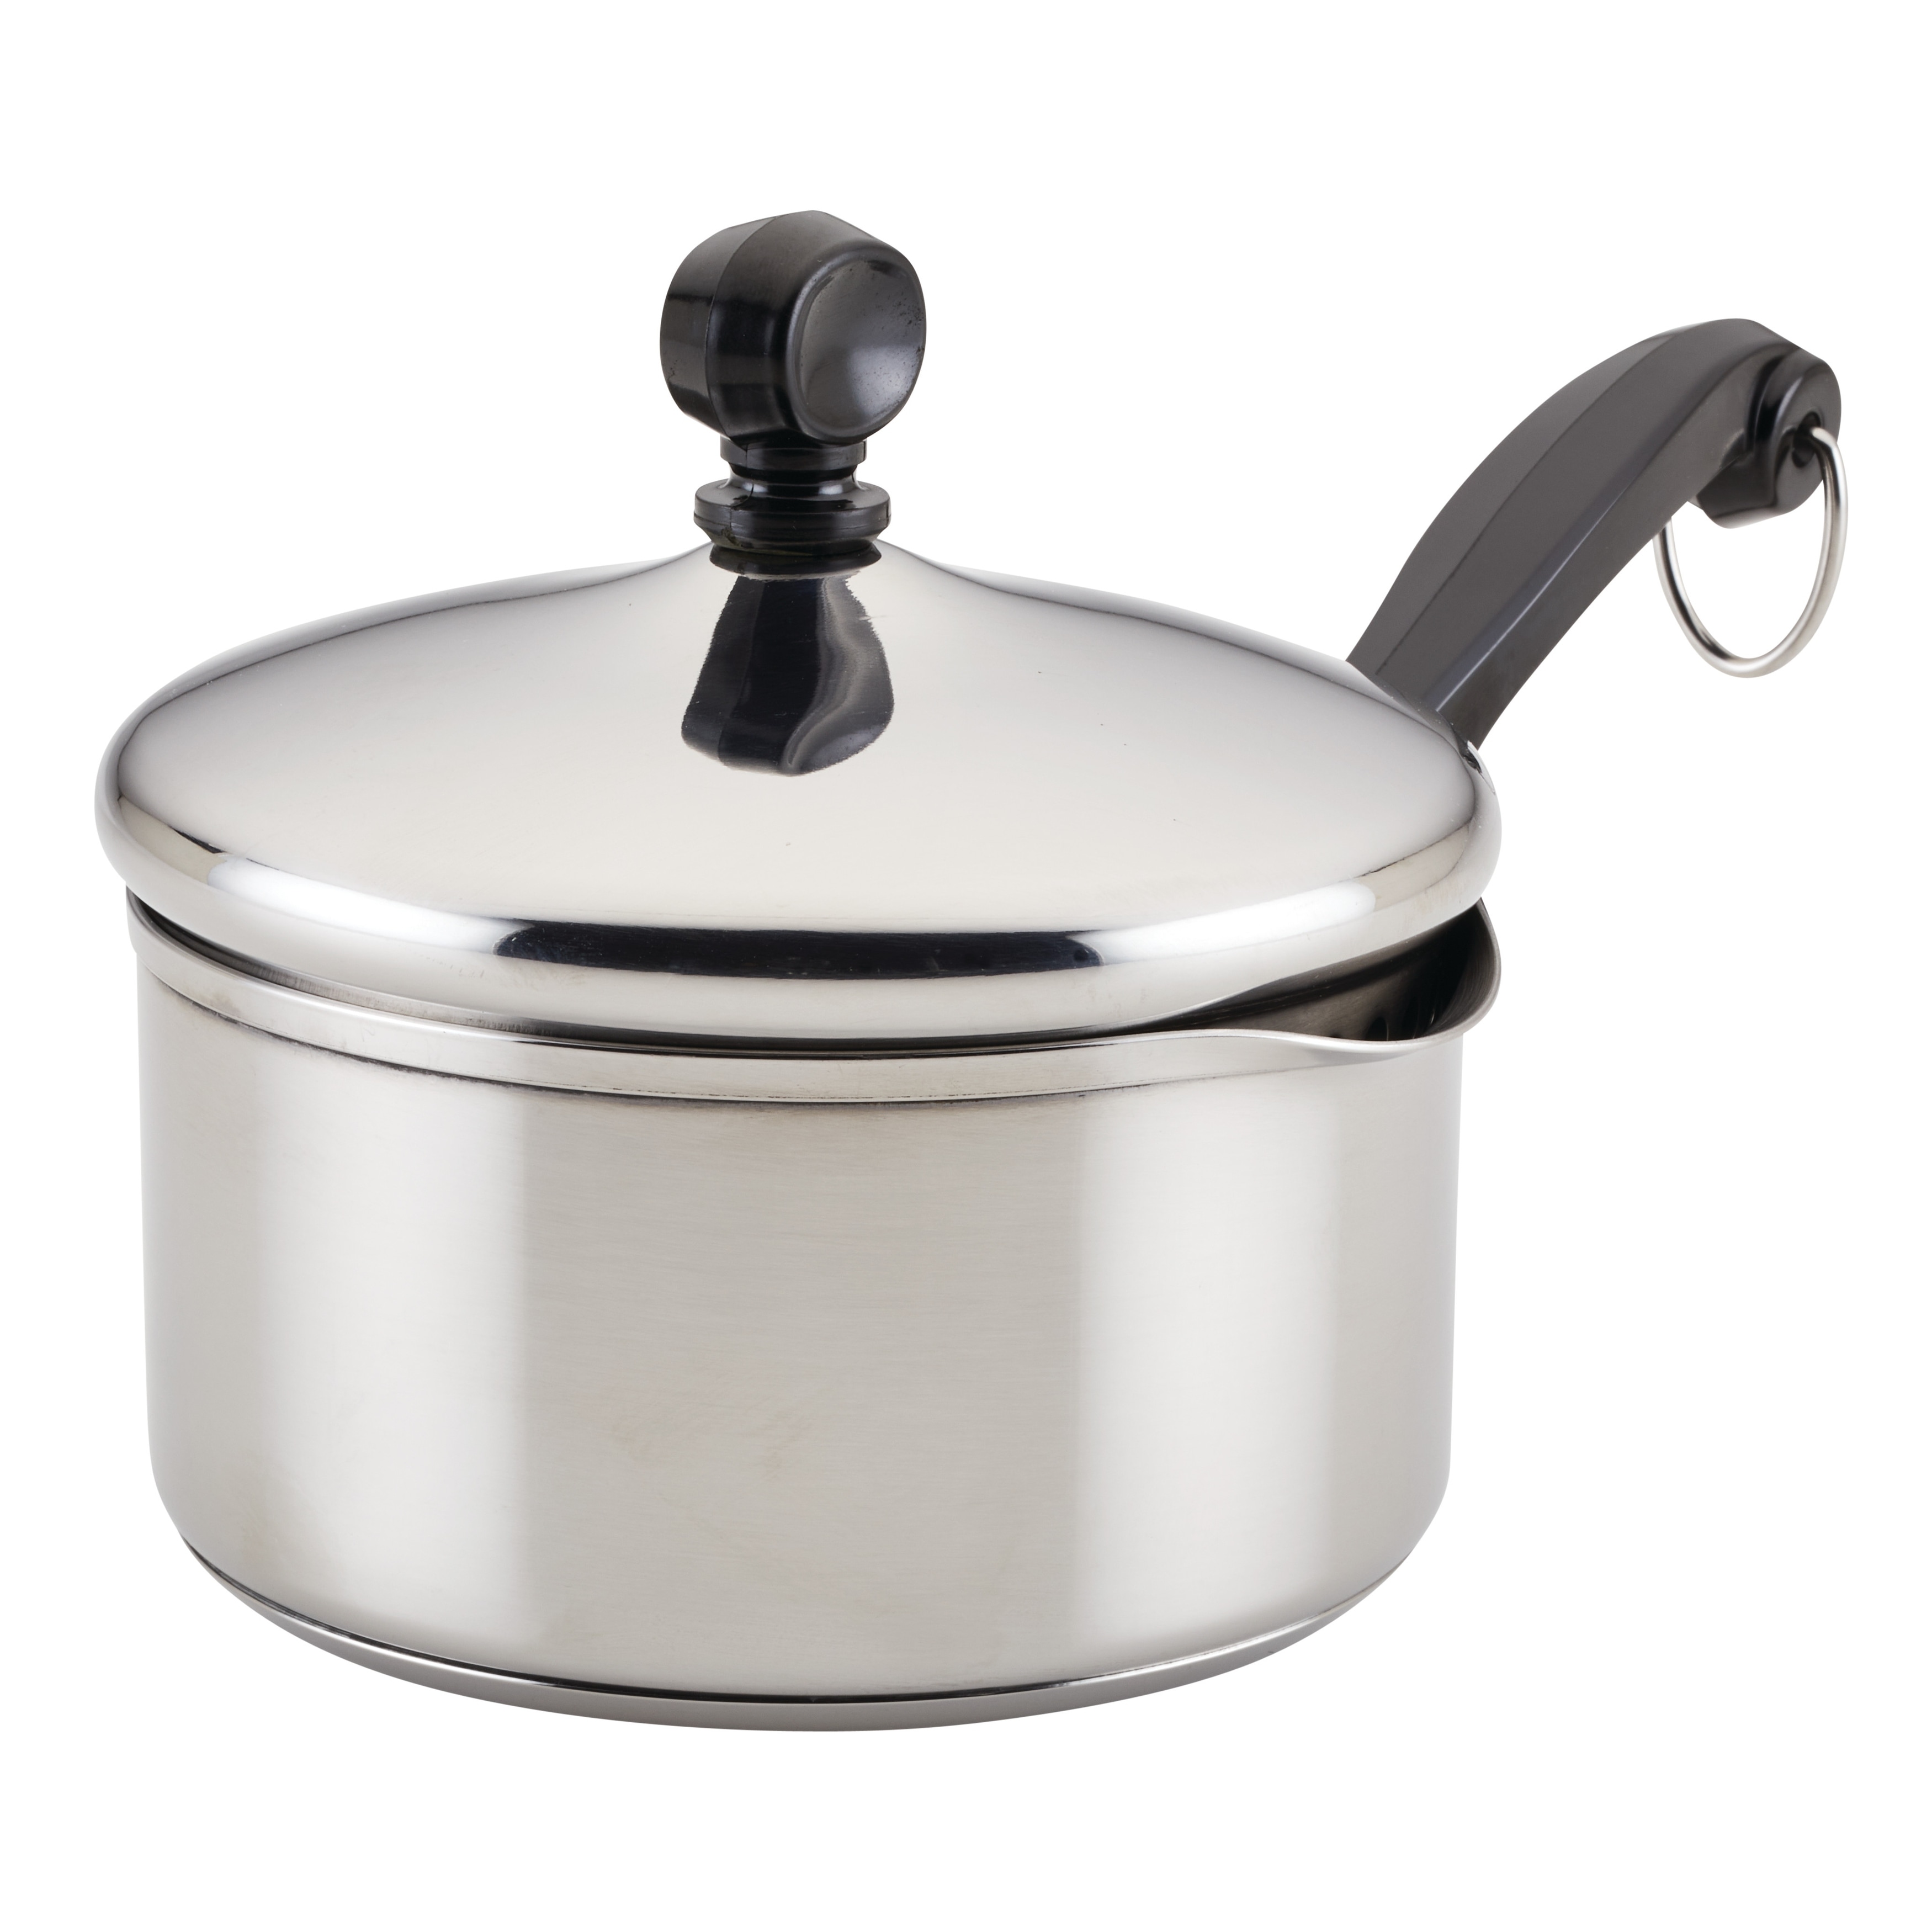 https://ak1.ostkcdn.com/images/products/is/images/direct/dc373fcf3772ae646cd676e2222f6d51c9a79266/Farberware-Classic-Stainless-Steel-1-quart-Covered-Straining-Saucepan.jpg